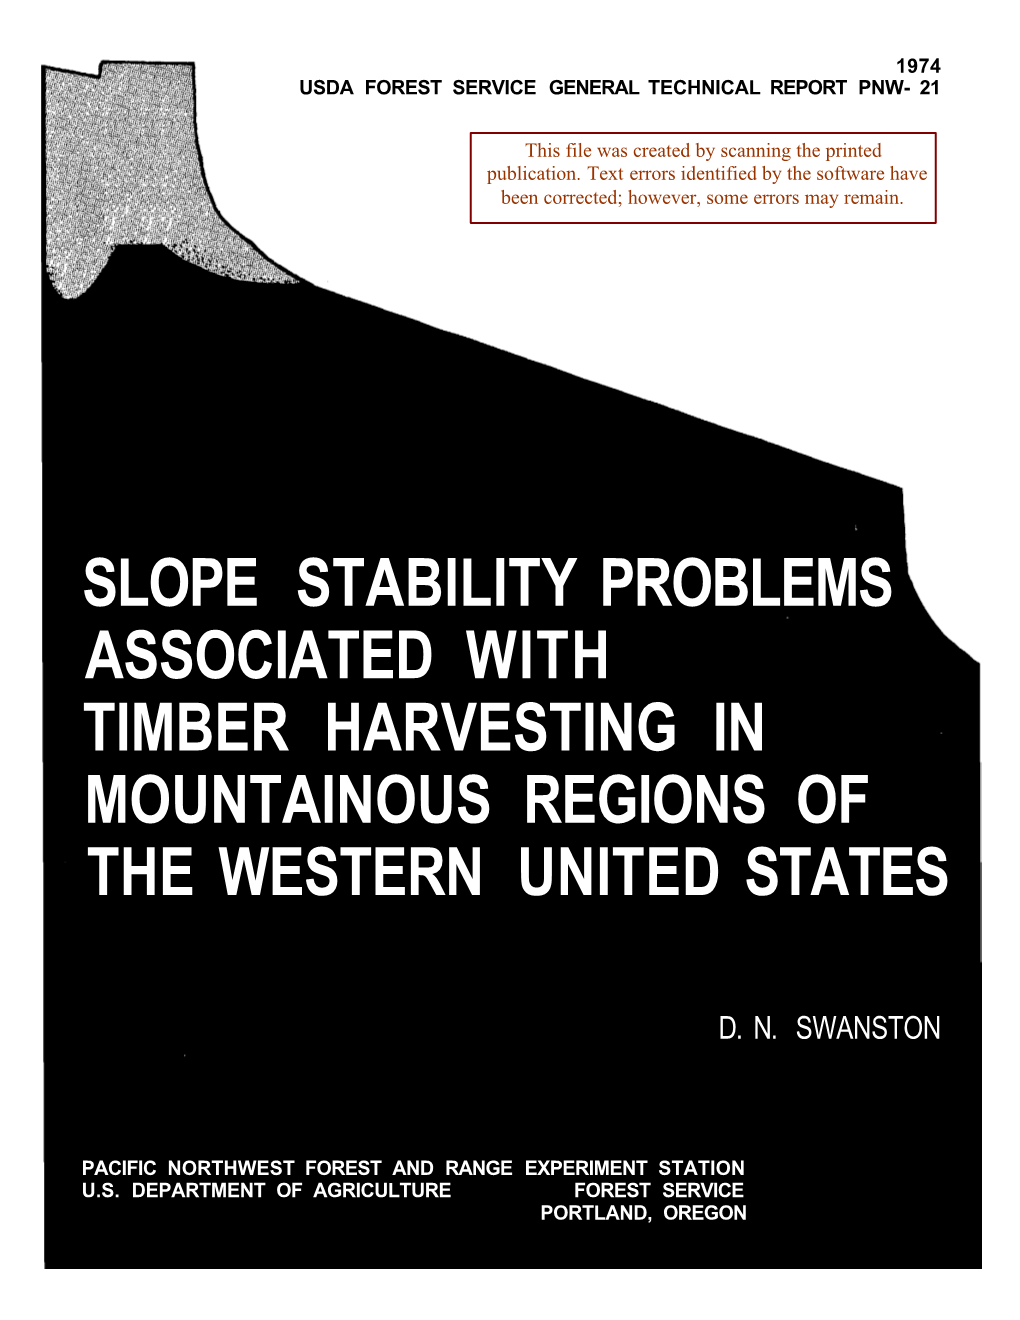 Slope Stability Problems Associated with Timber Harvesting in Mountainous Regions of the Western United States